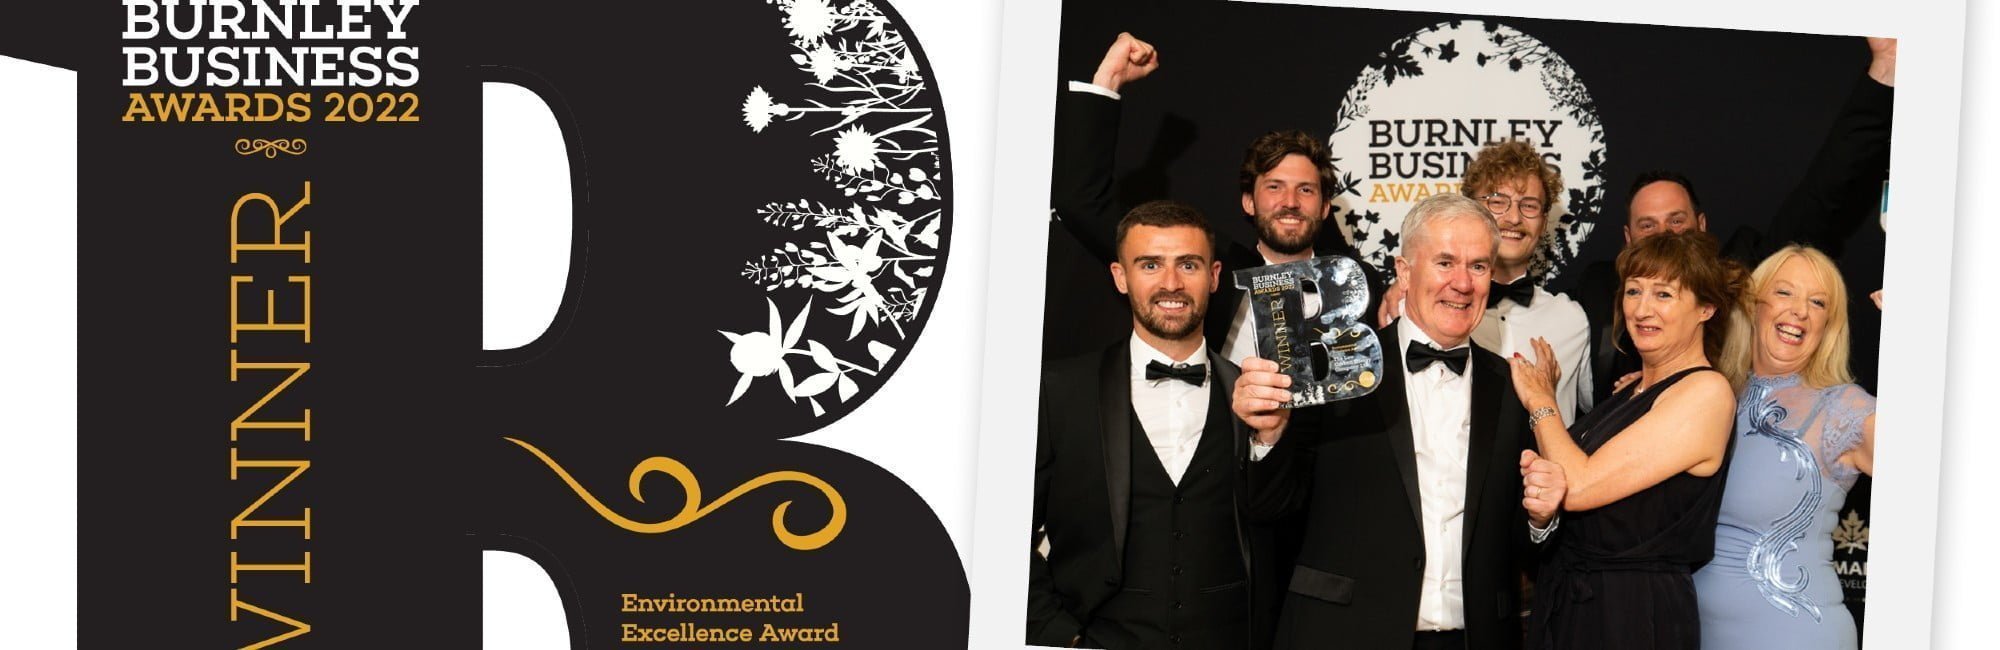 We’ve won the Environmental Excellence award at the Burnley Business Awards